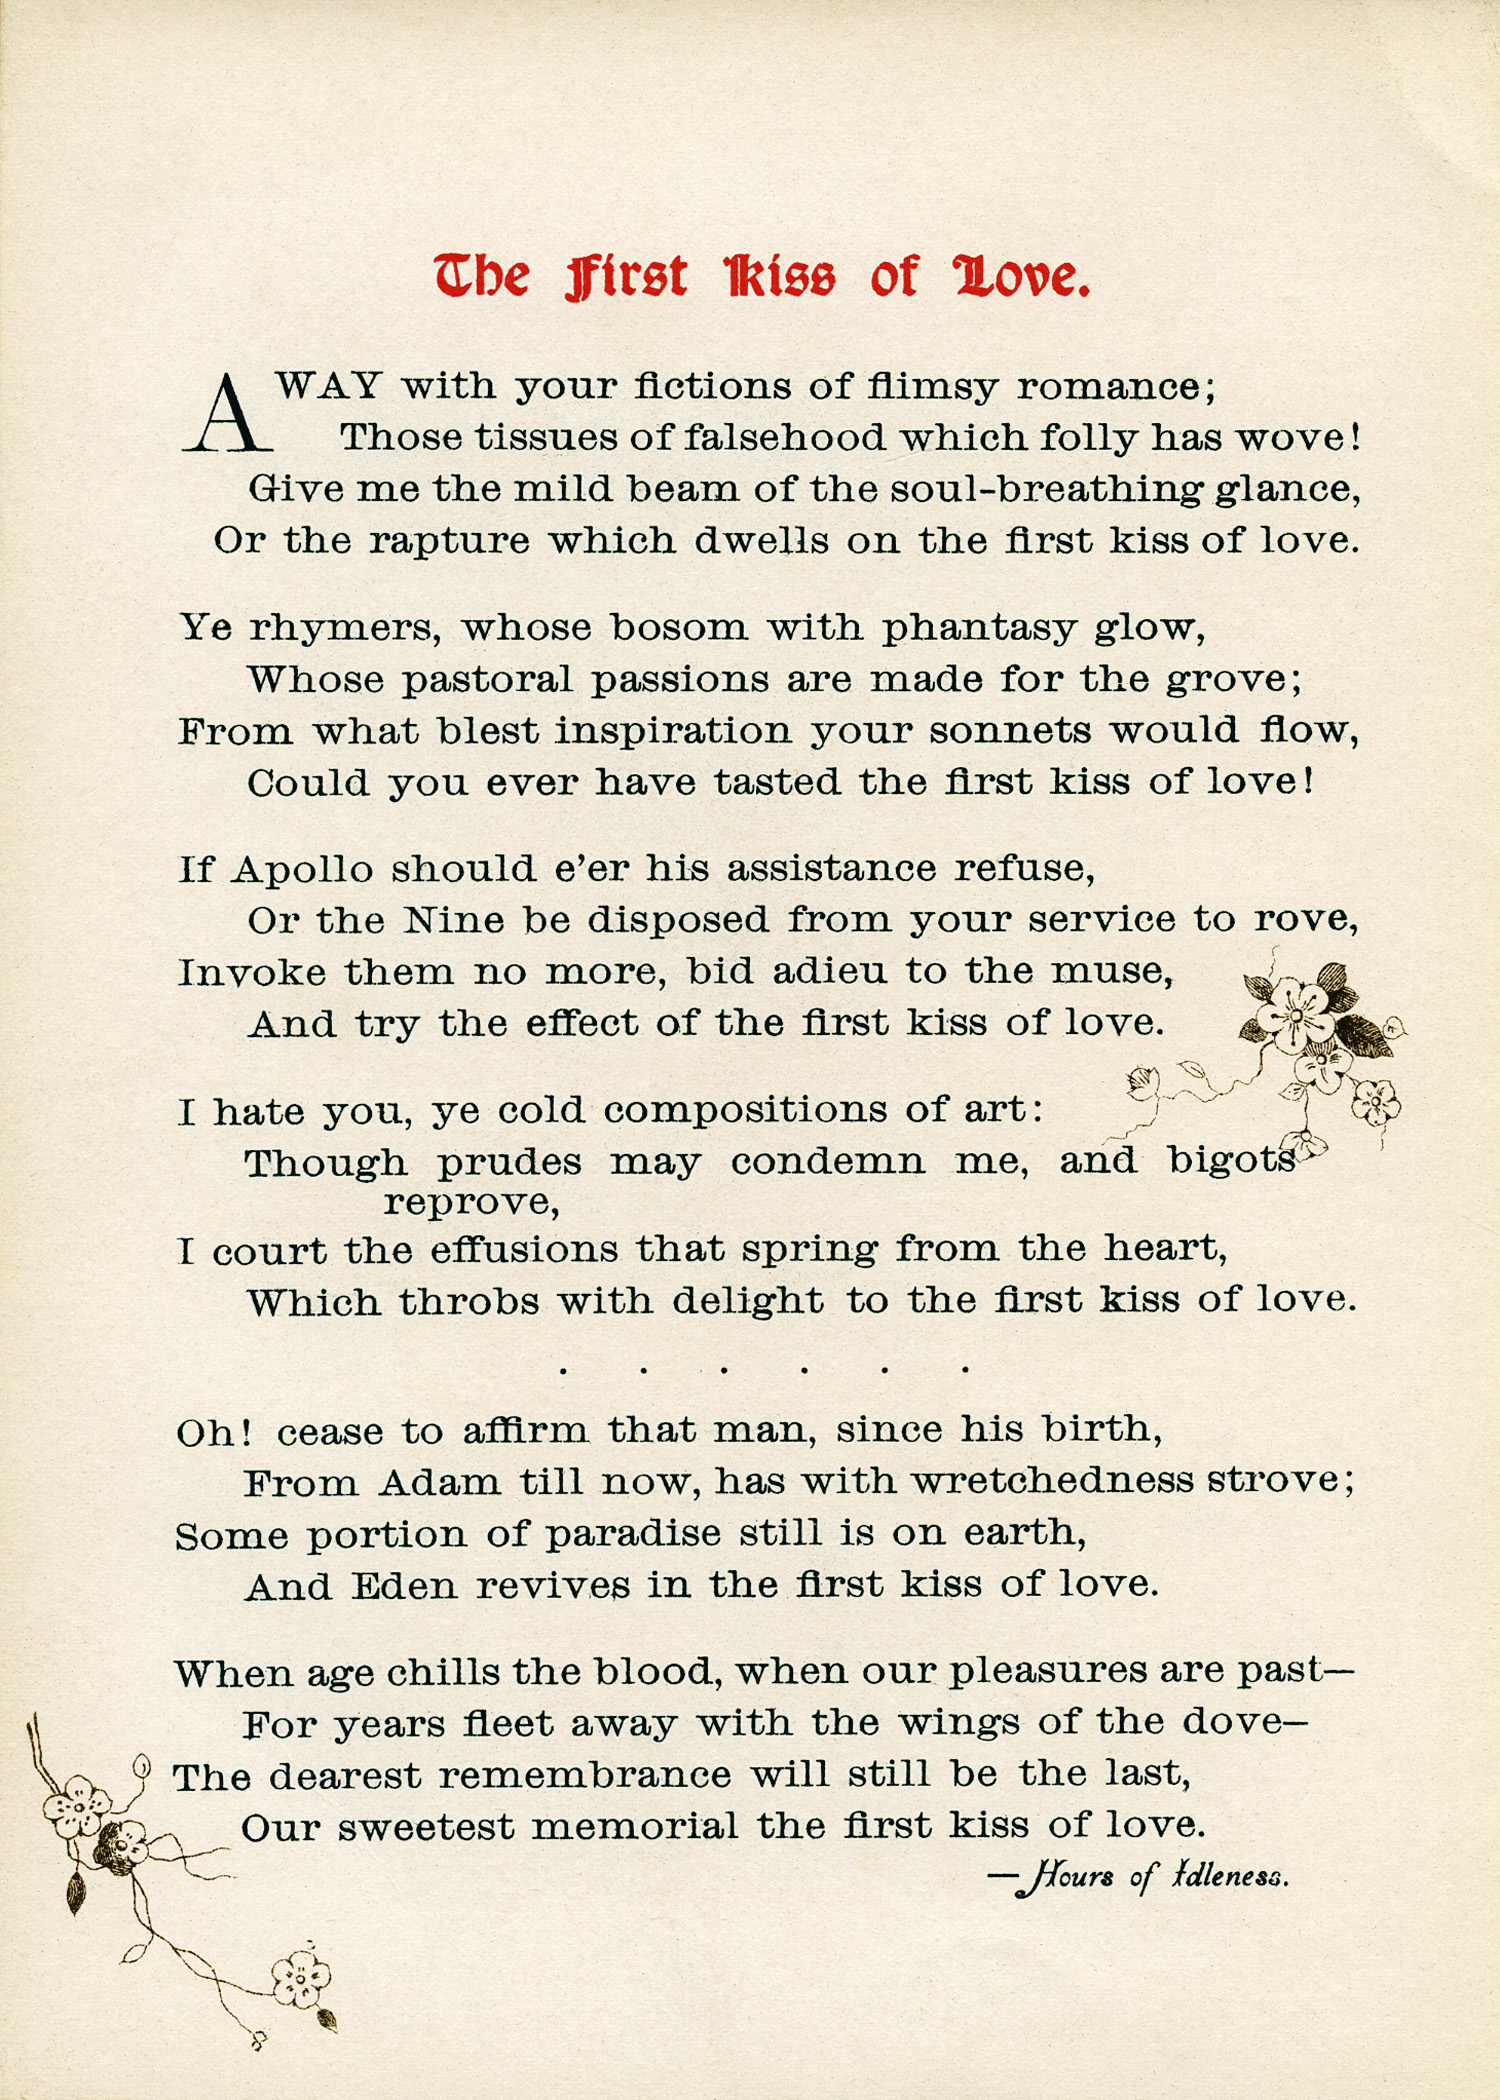 Free Vintage Poem ~ The First Kiss of Love